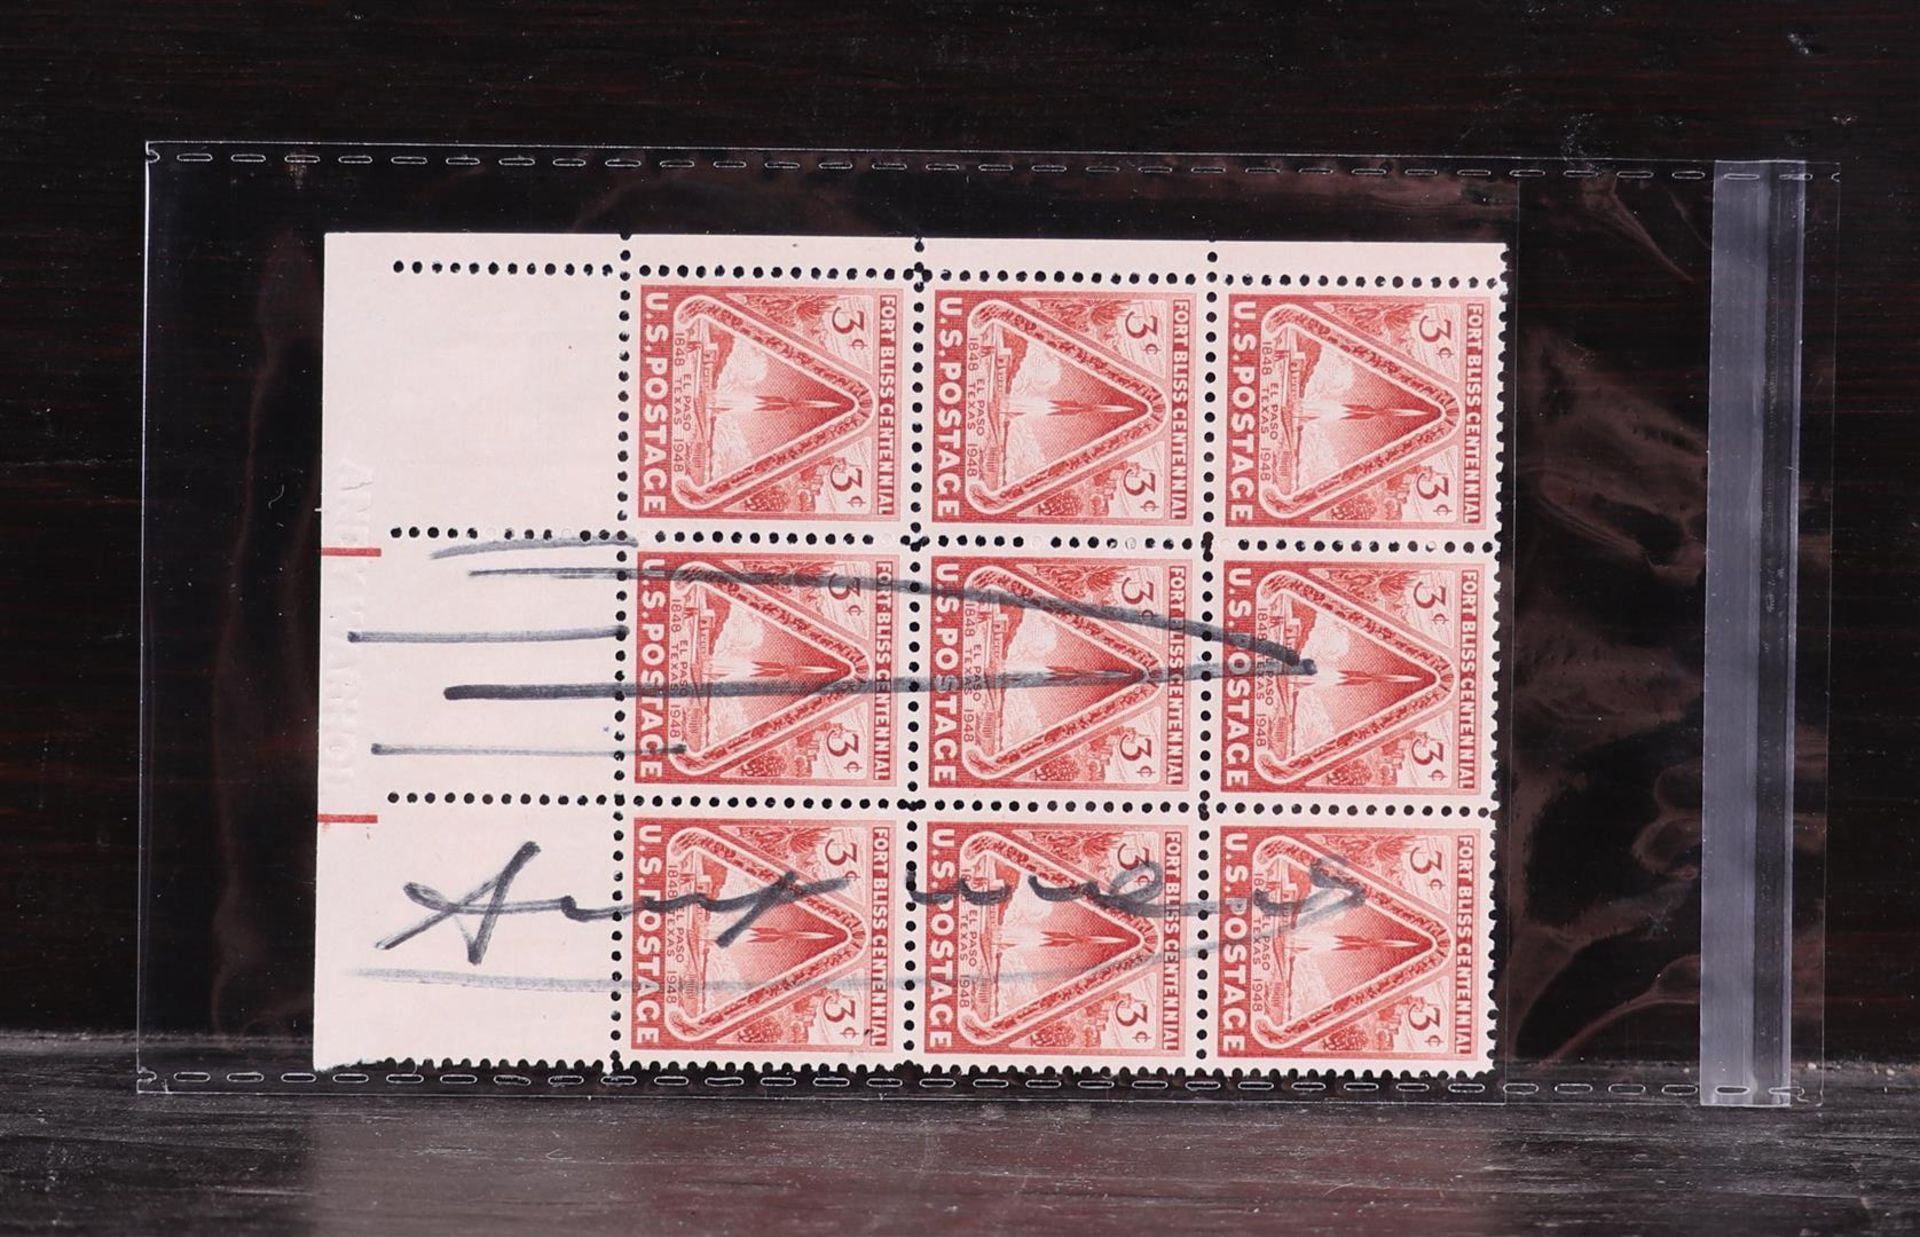 Andy Warhol (Pittsburgh, , 1928 - 1987New York Presbyterian), (after),Nine Stamps, 3 cents. 